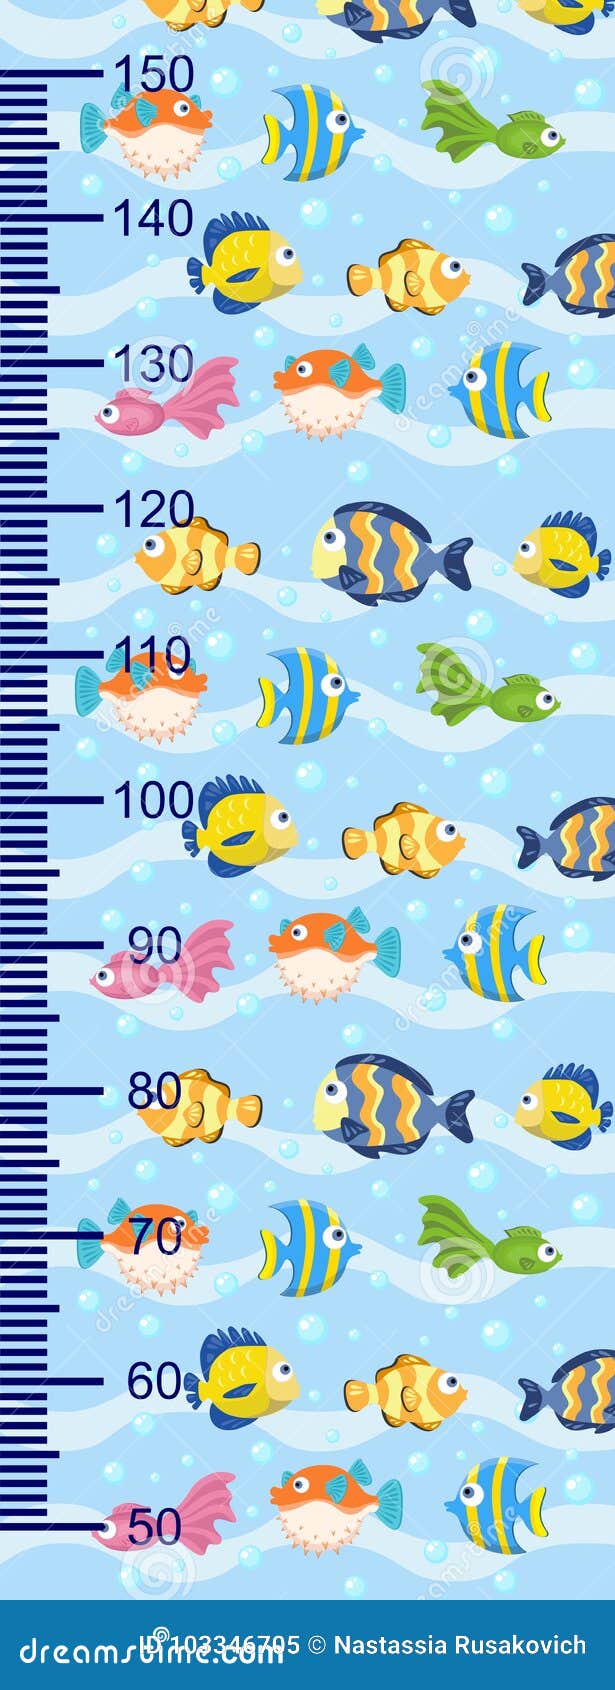 Download Growth Measures With Fish In The Sea. Stock Vector - Illustration of cute, collection: 103346705